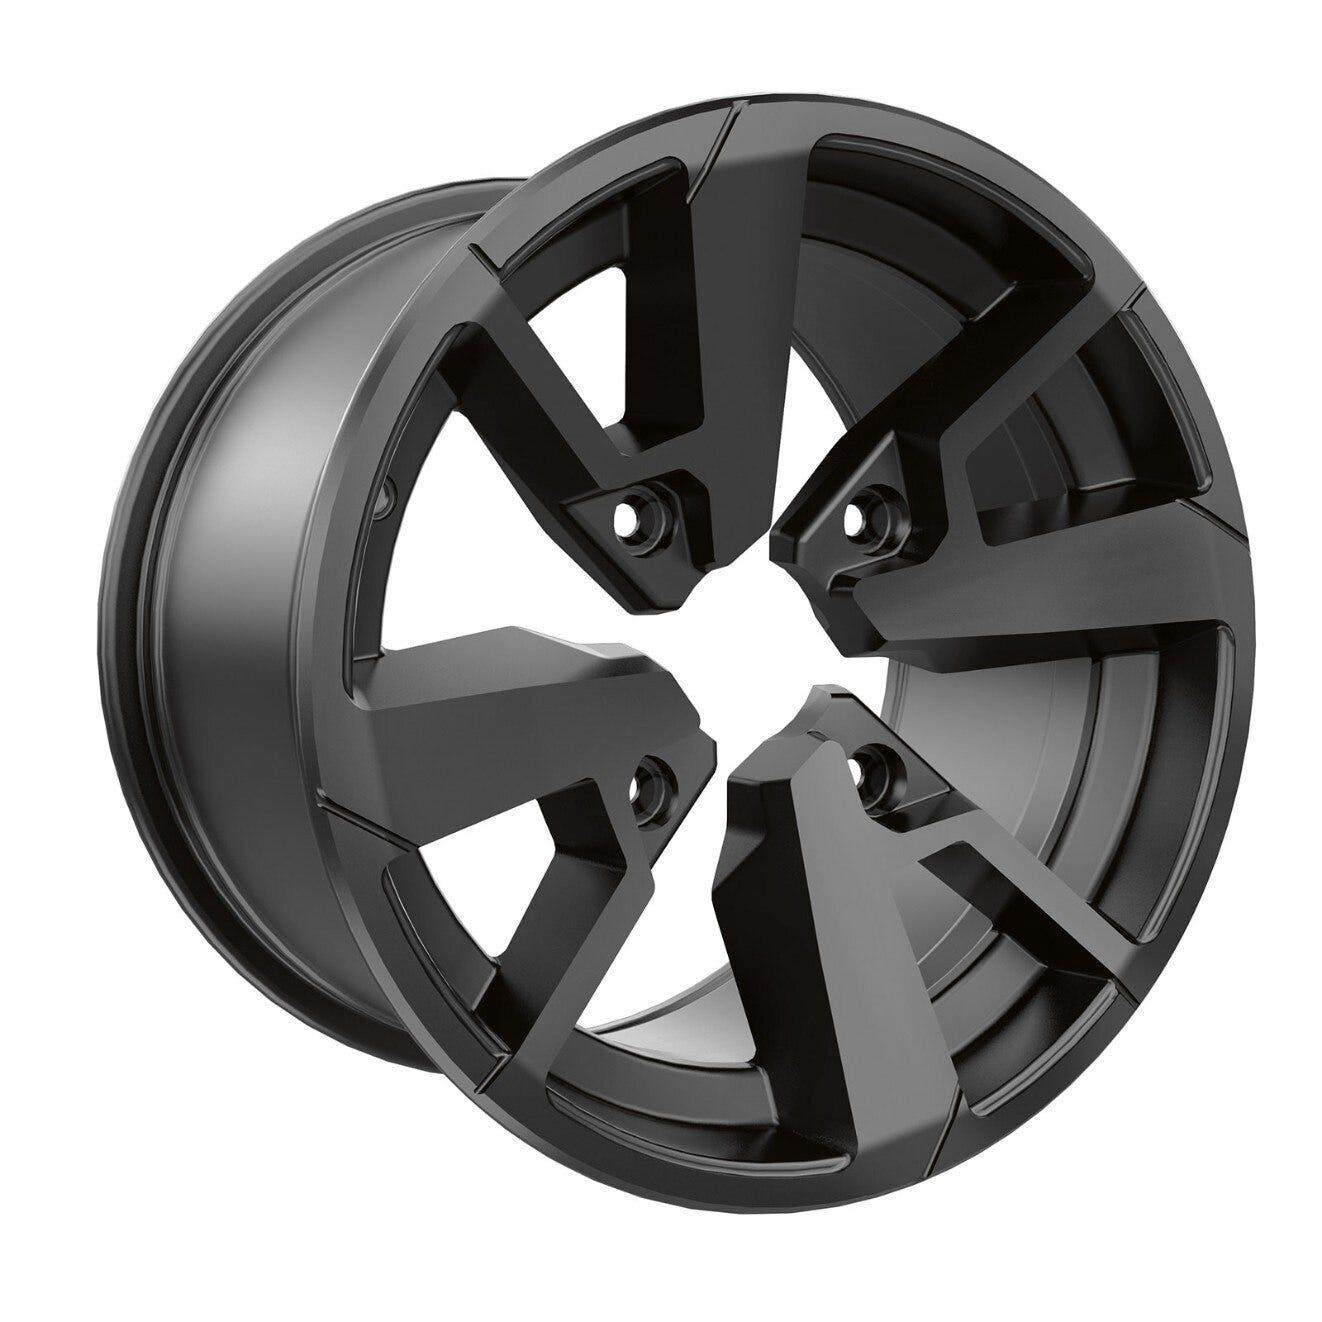 14" Rim - Rear / Black with clear coat